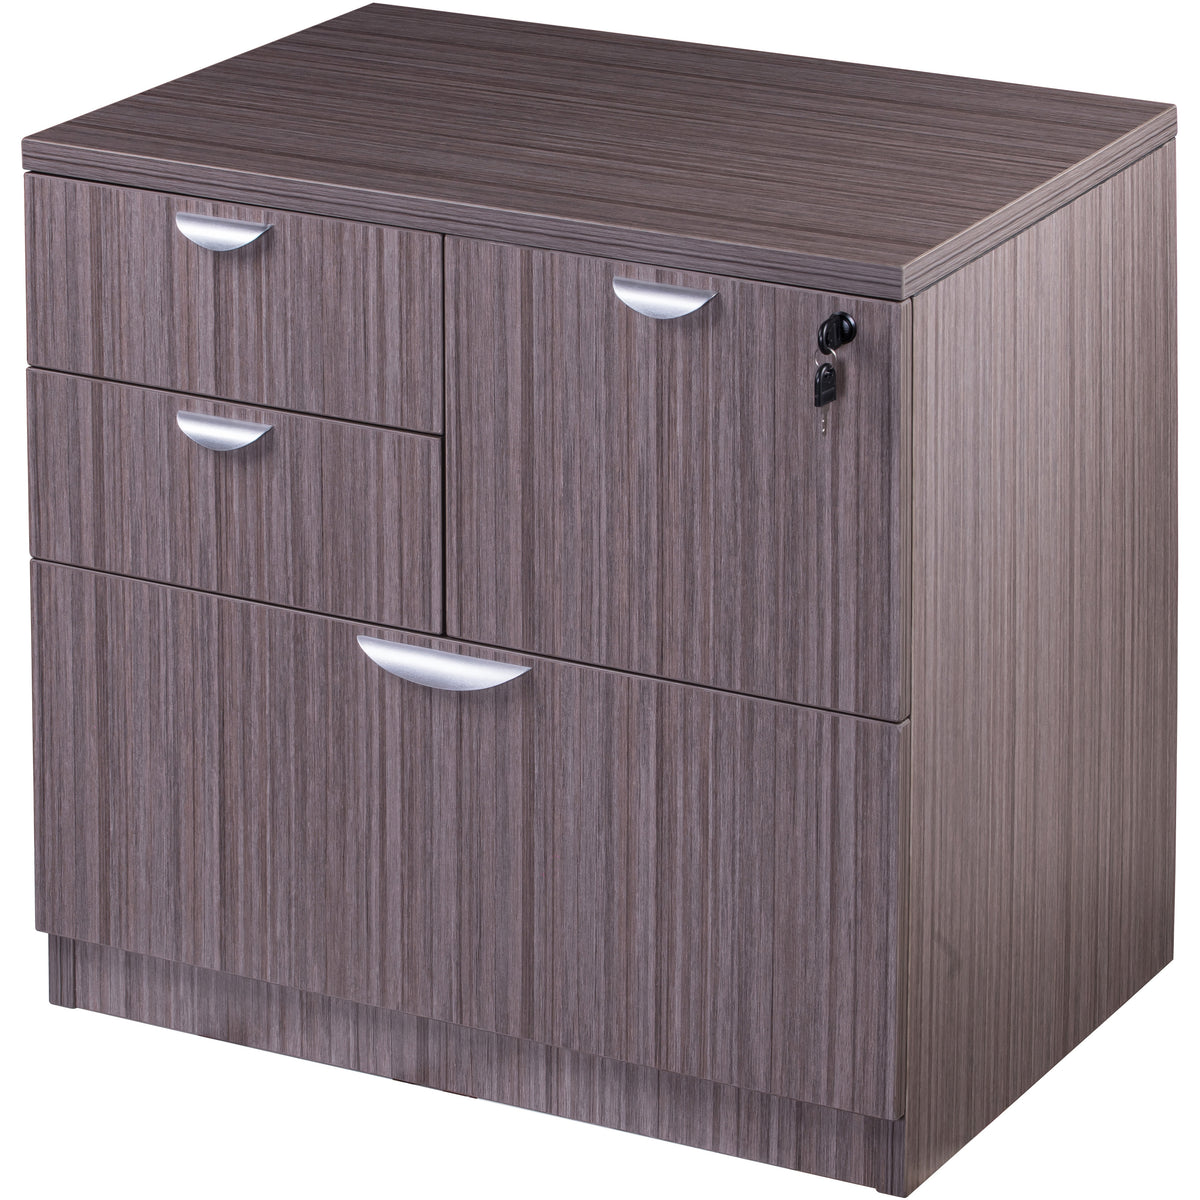 Combo Lateral File, Driftwood 31x22, N114-DW